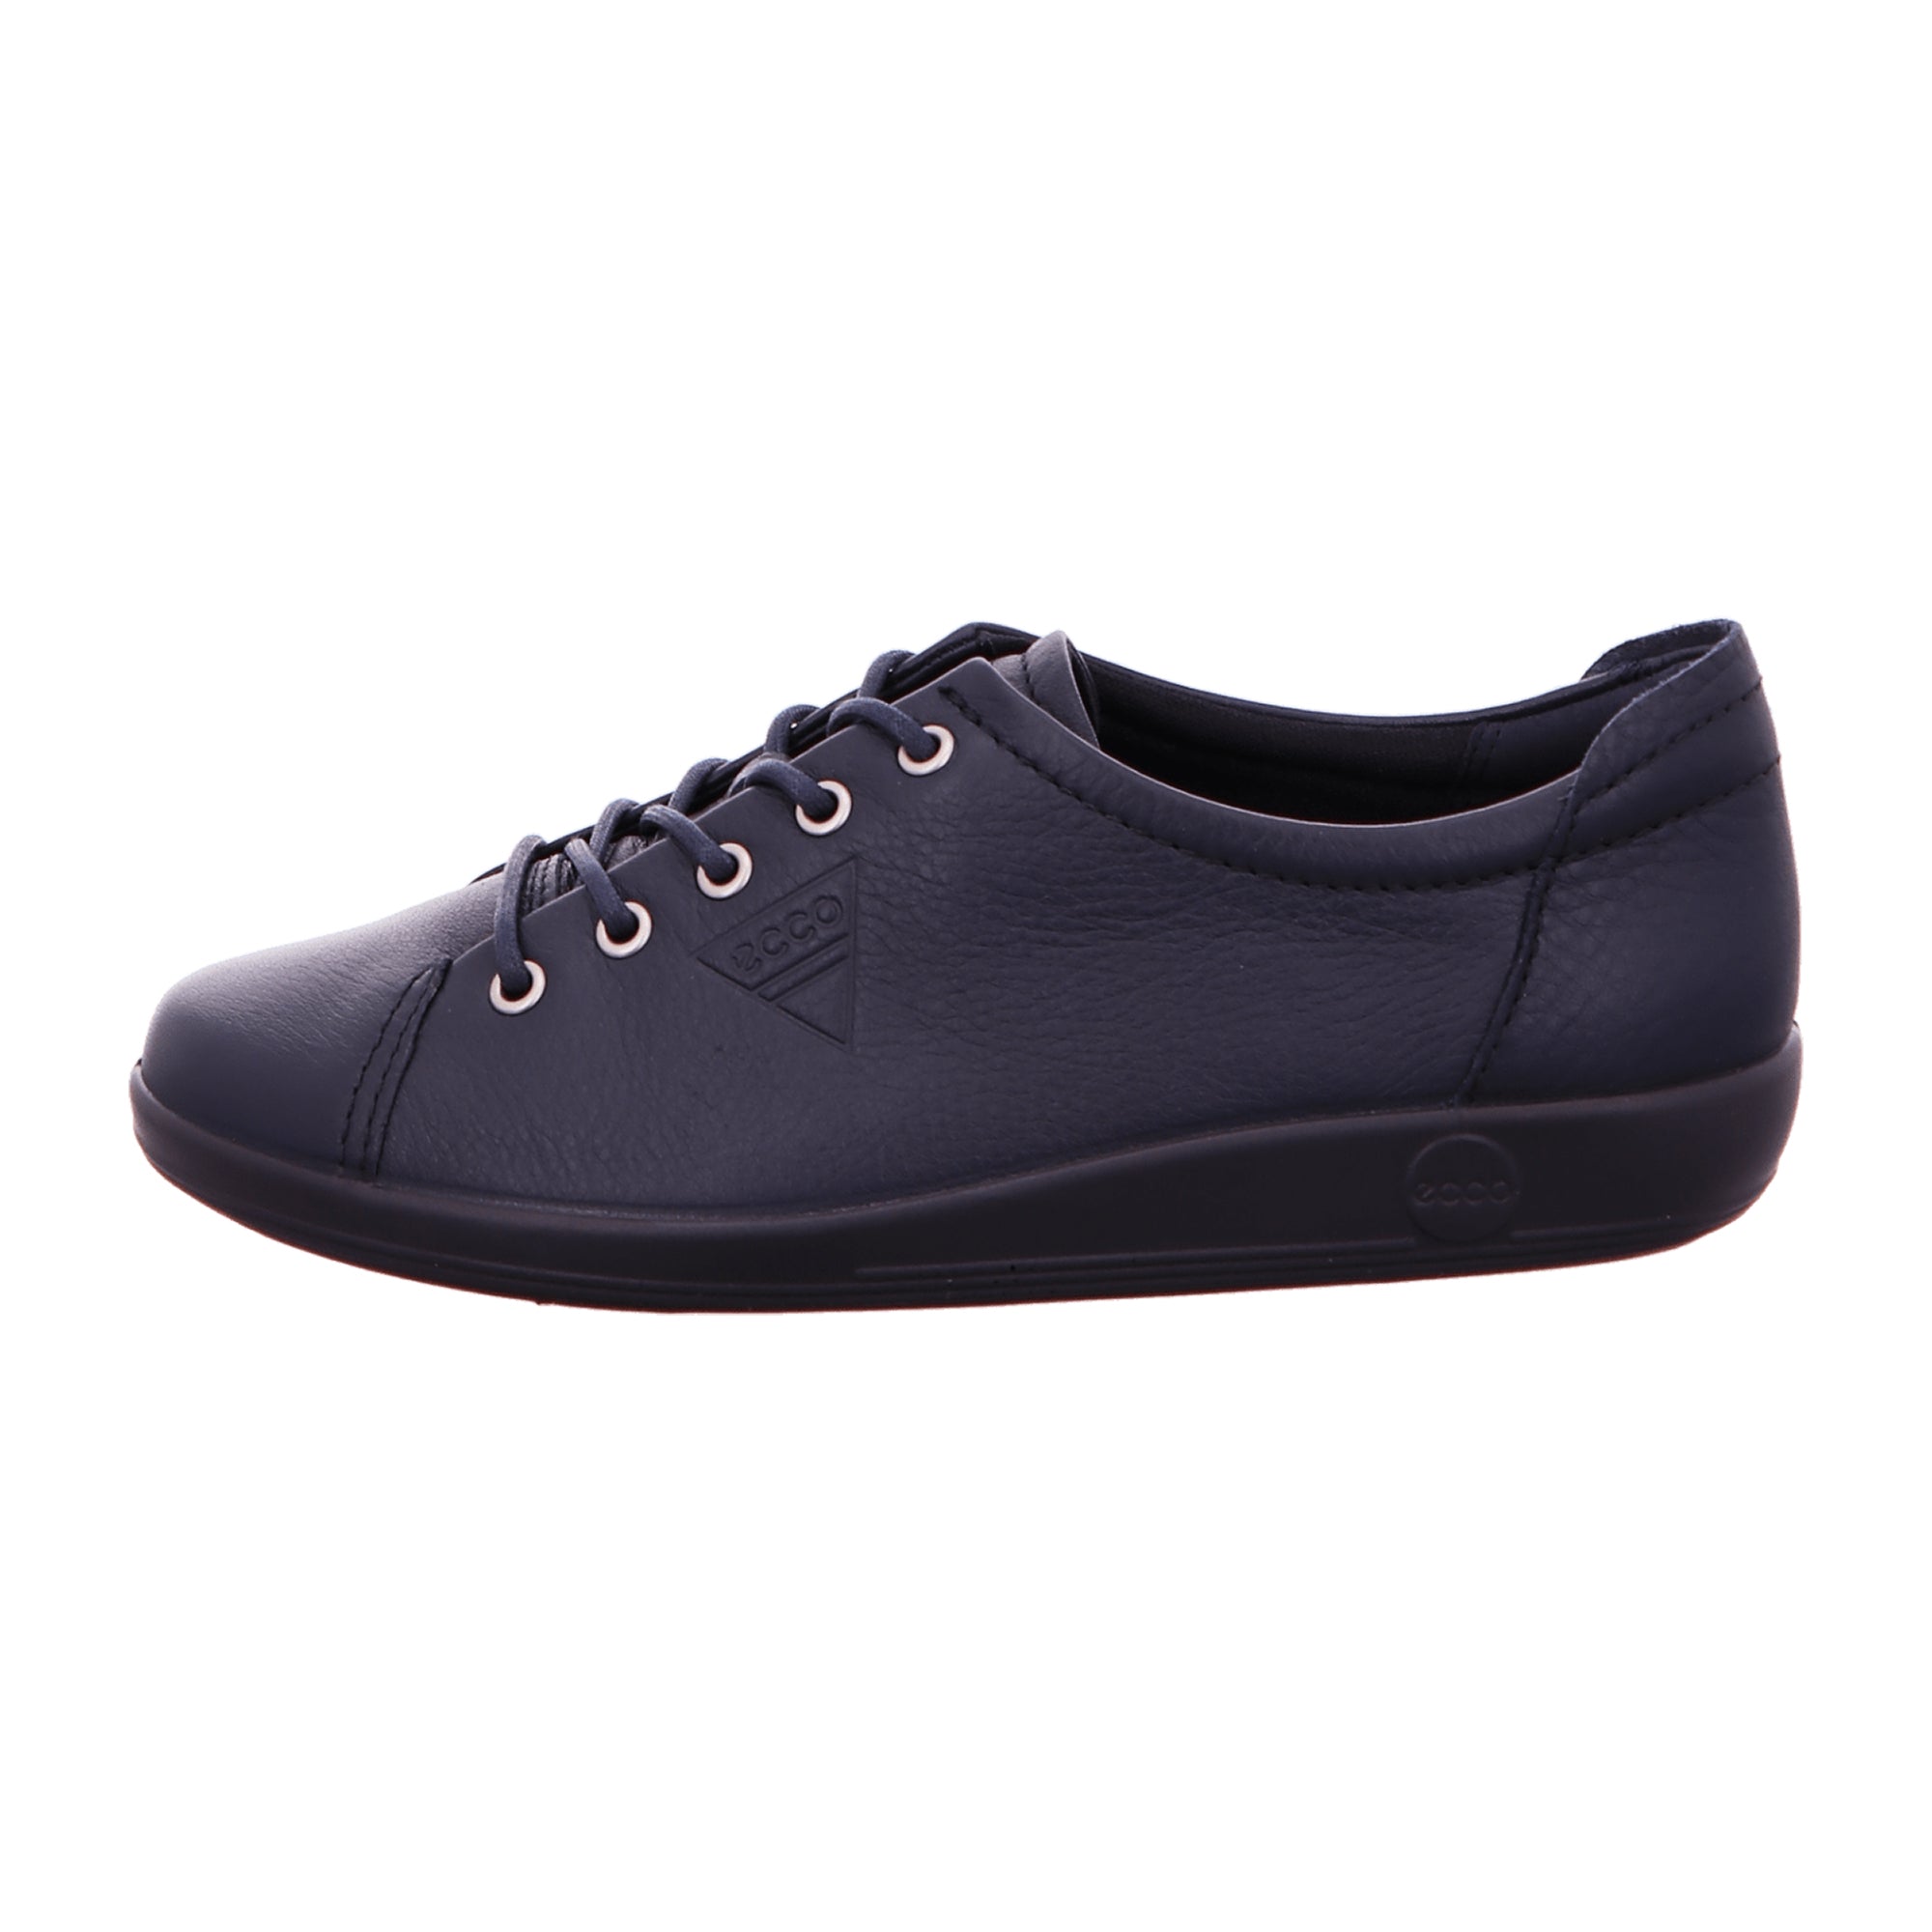 Ecco Women's Blue Shoes - Stylish & Durable Comfort Footwear for Young Adults